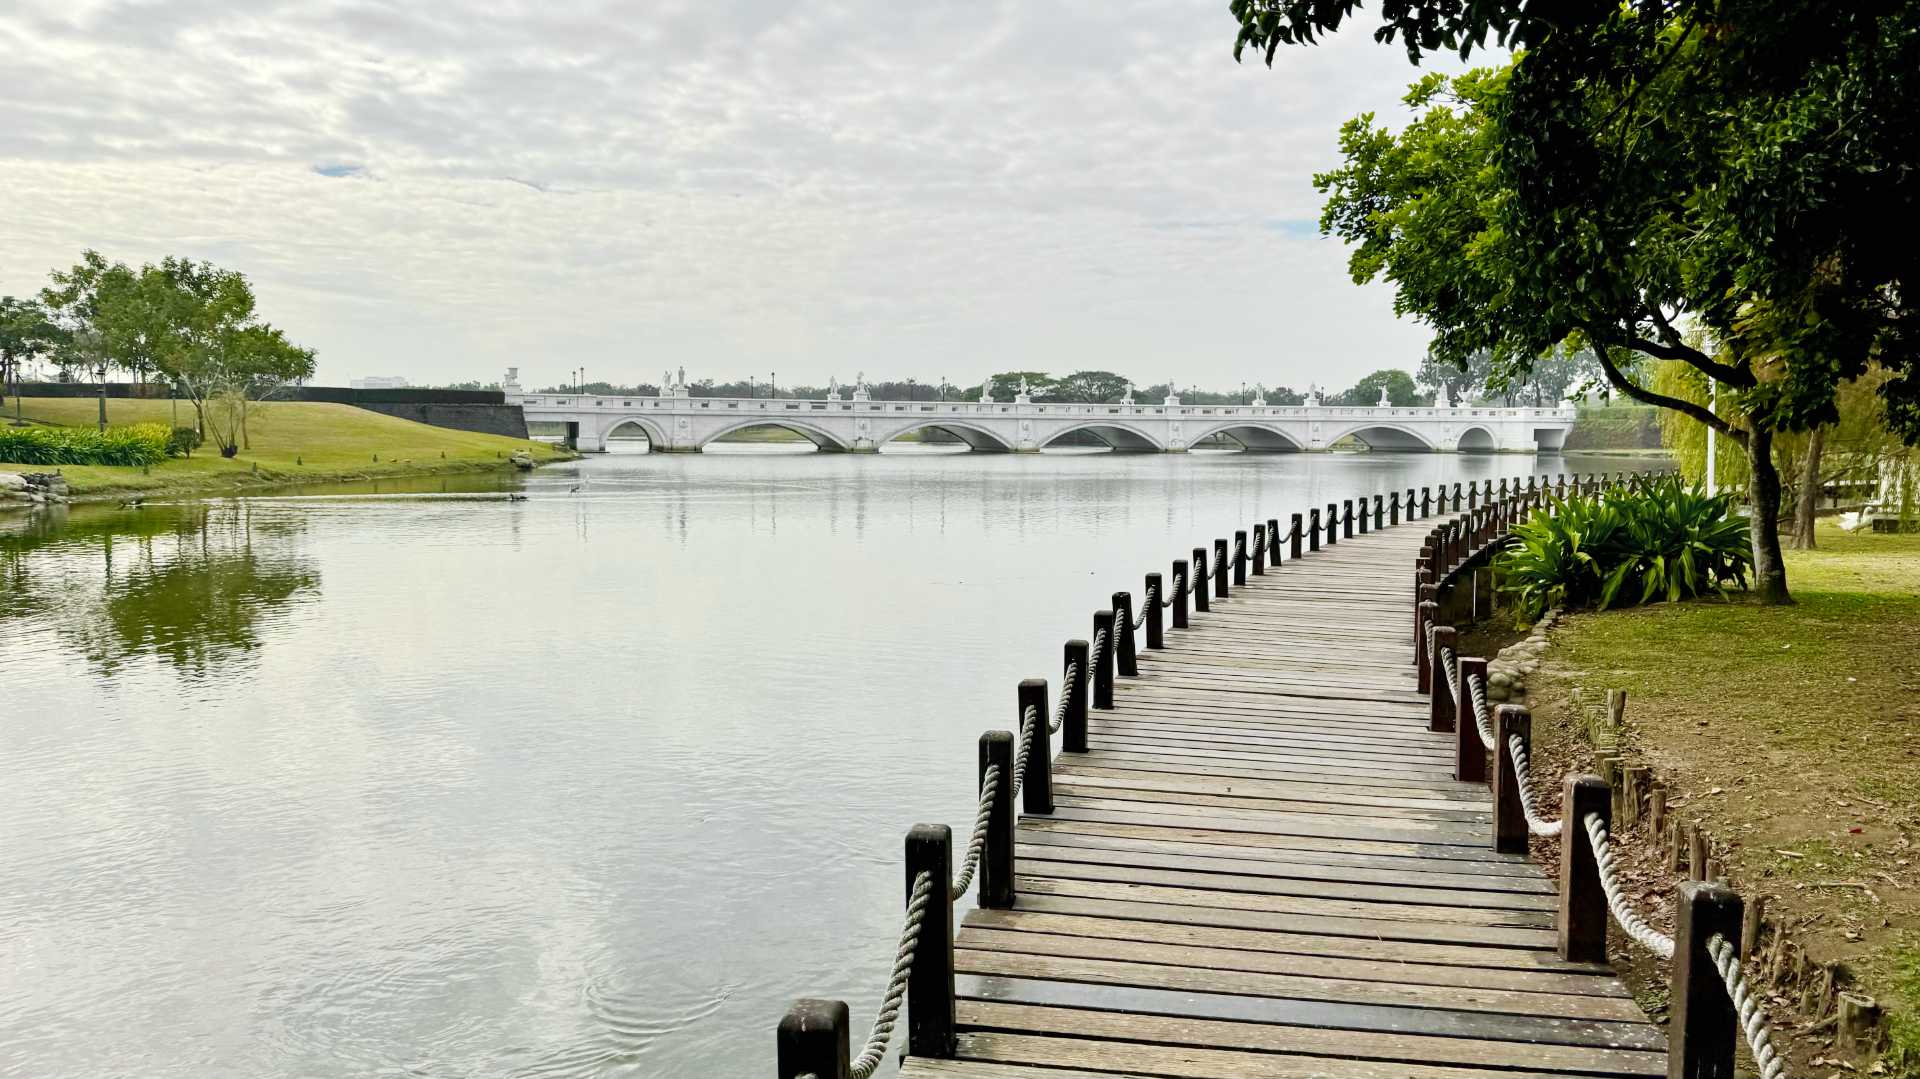 A curved boardwalk next to a lake, with an arched footbridge in the distance.